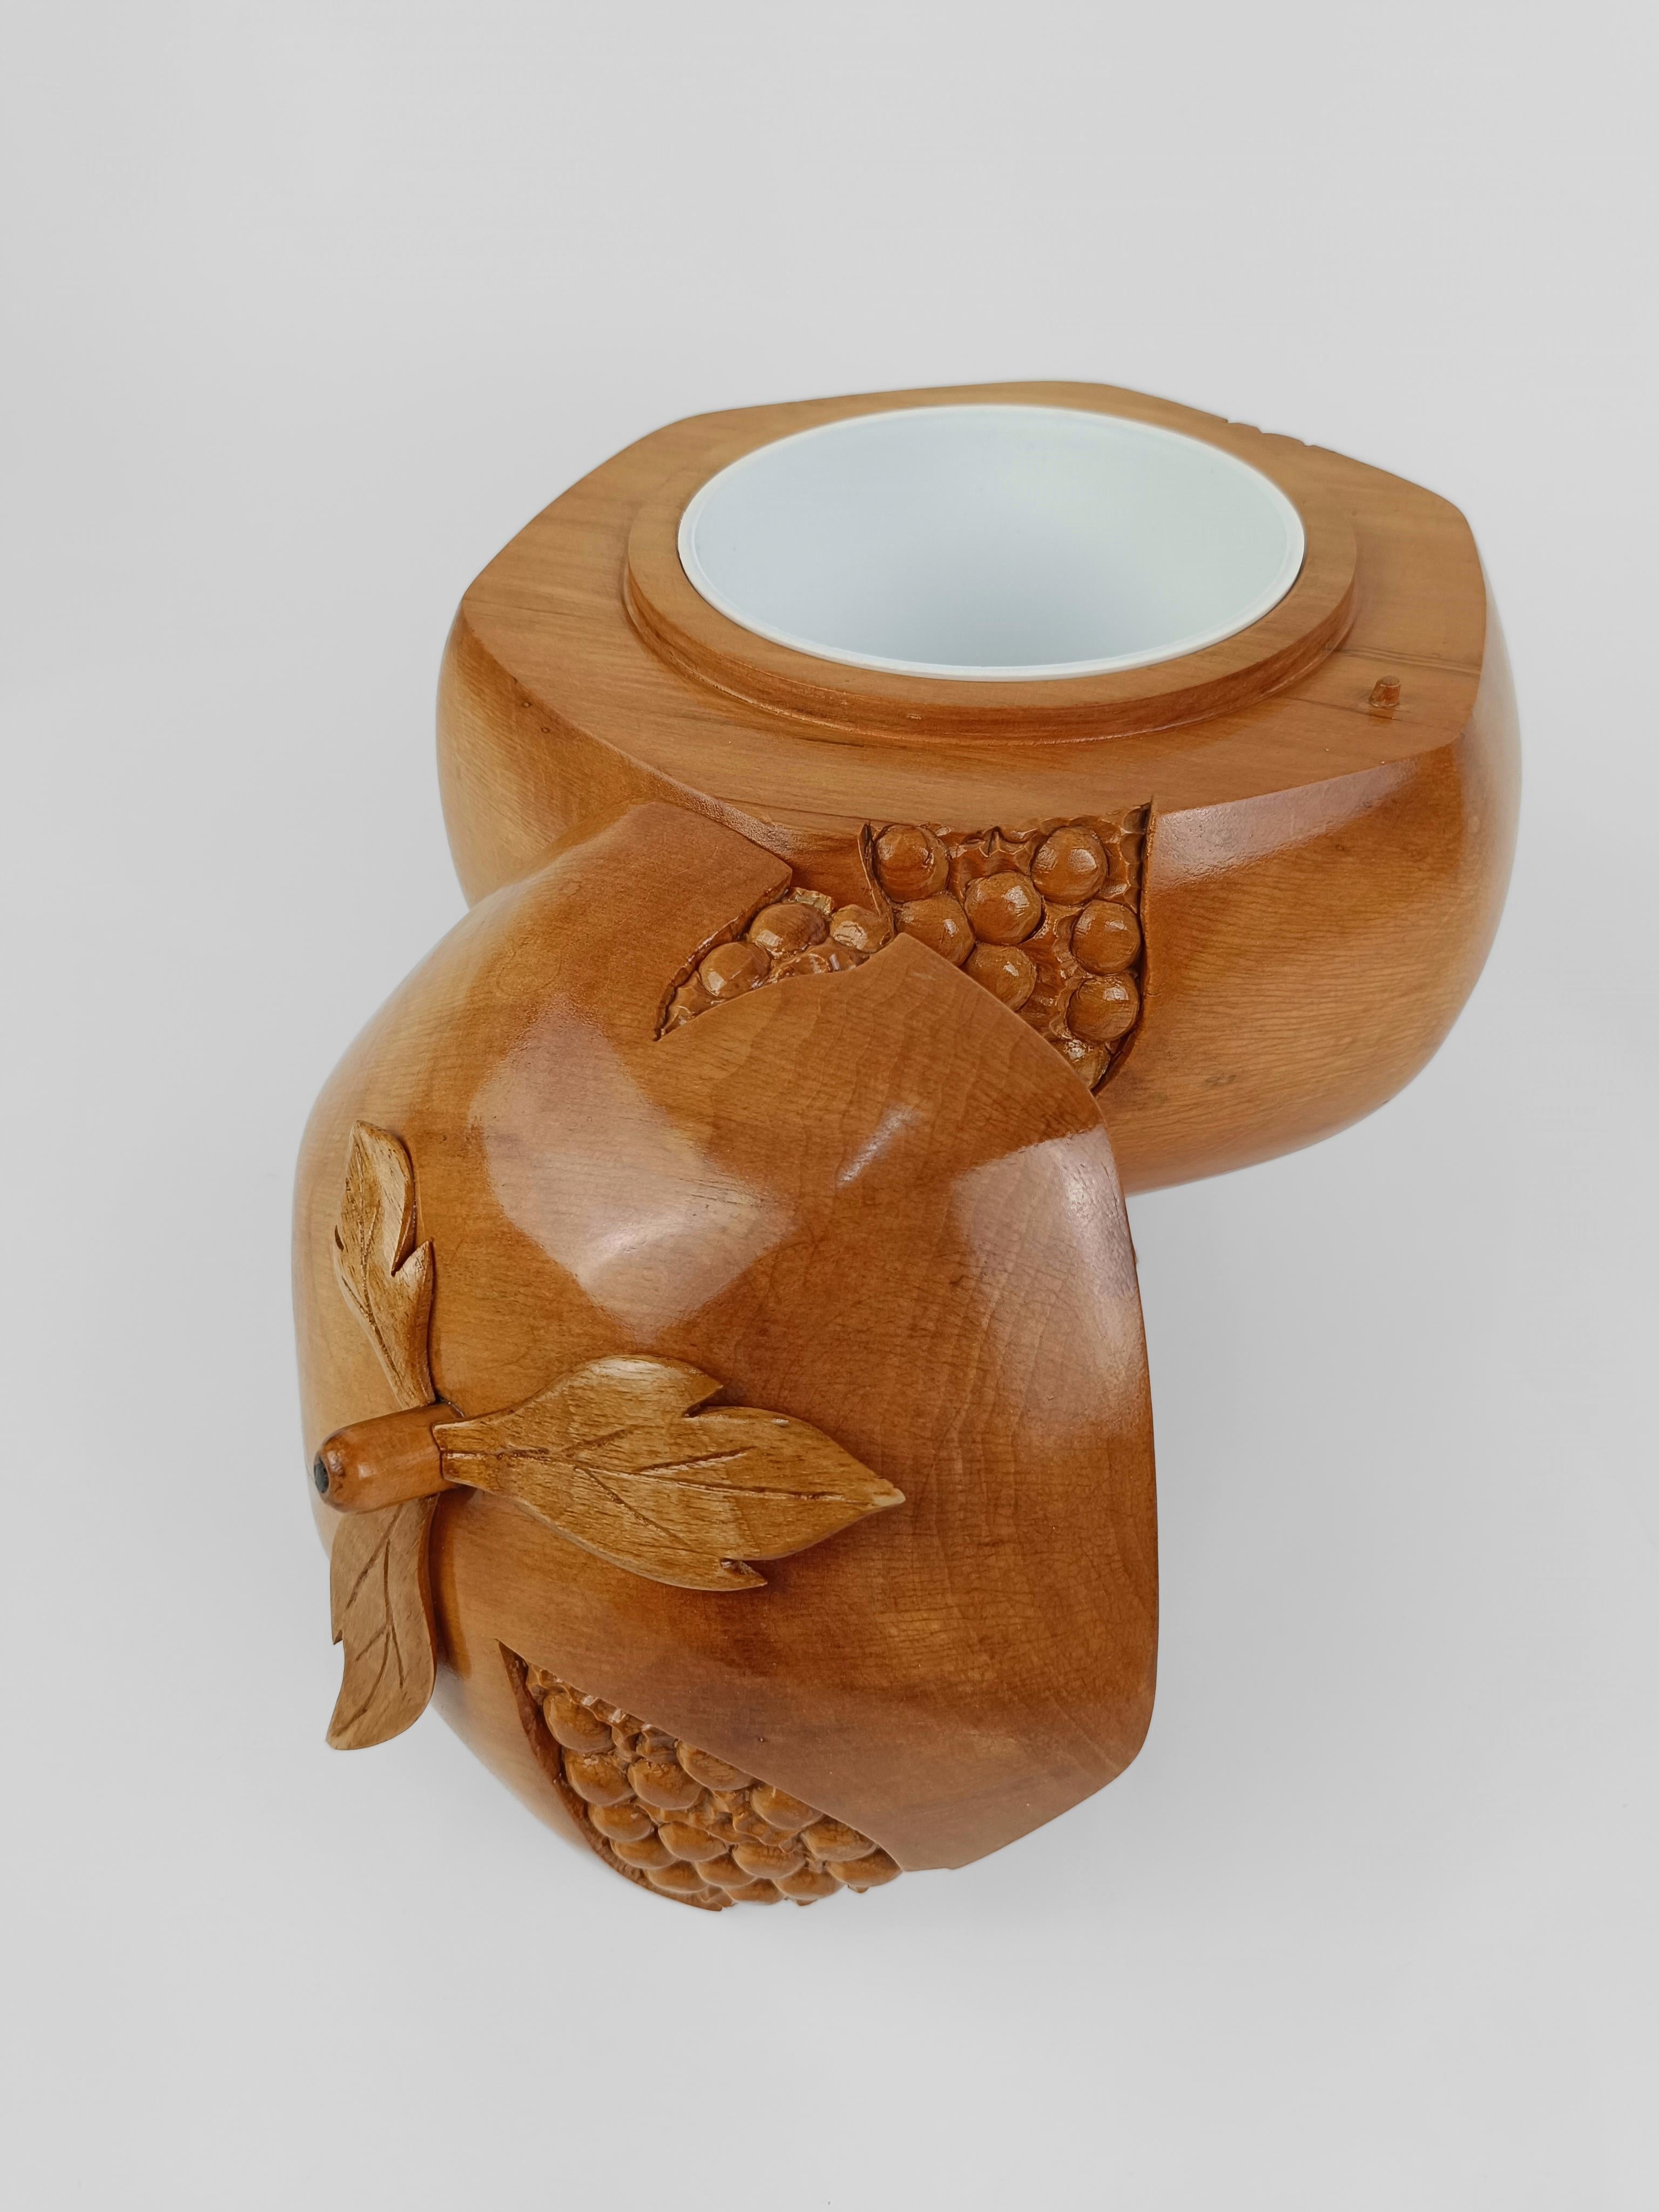 Sculptural Vintage Ice Bucket in maple wood carved in the shape of a pomegranate For Sale 7